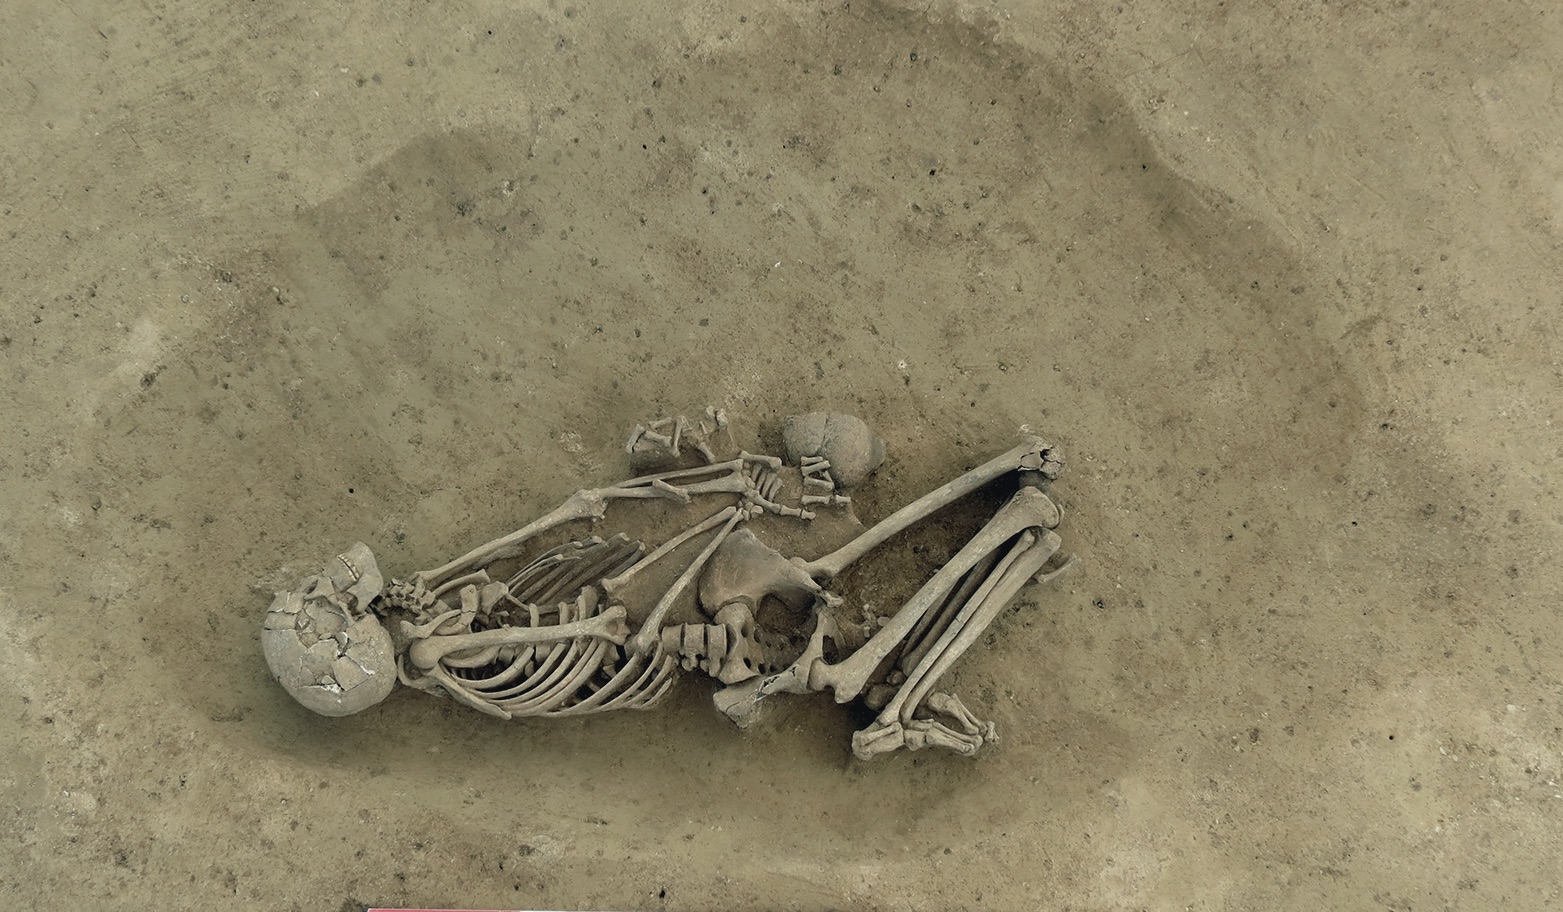 Early Neolithic burial from Alsace (Morschwiller-le-Bas  Ungeheuer Hoelzle, Haut-Rhin)